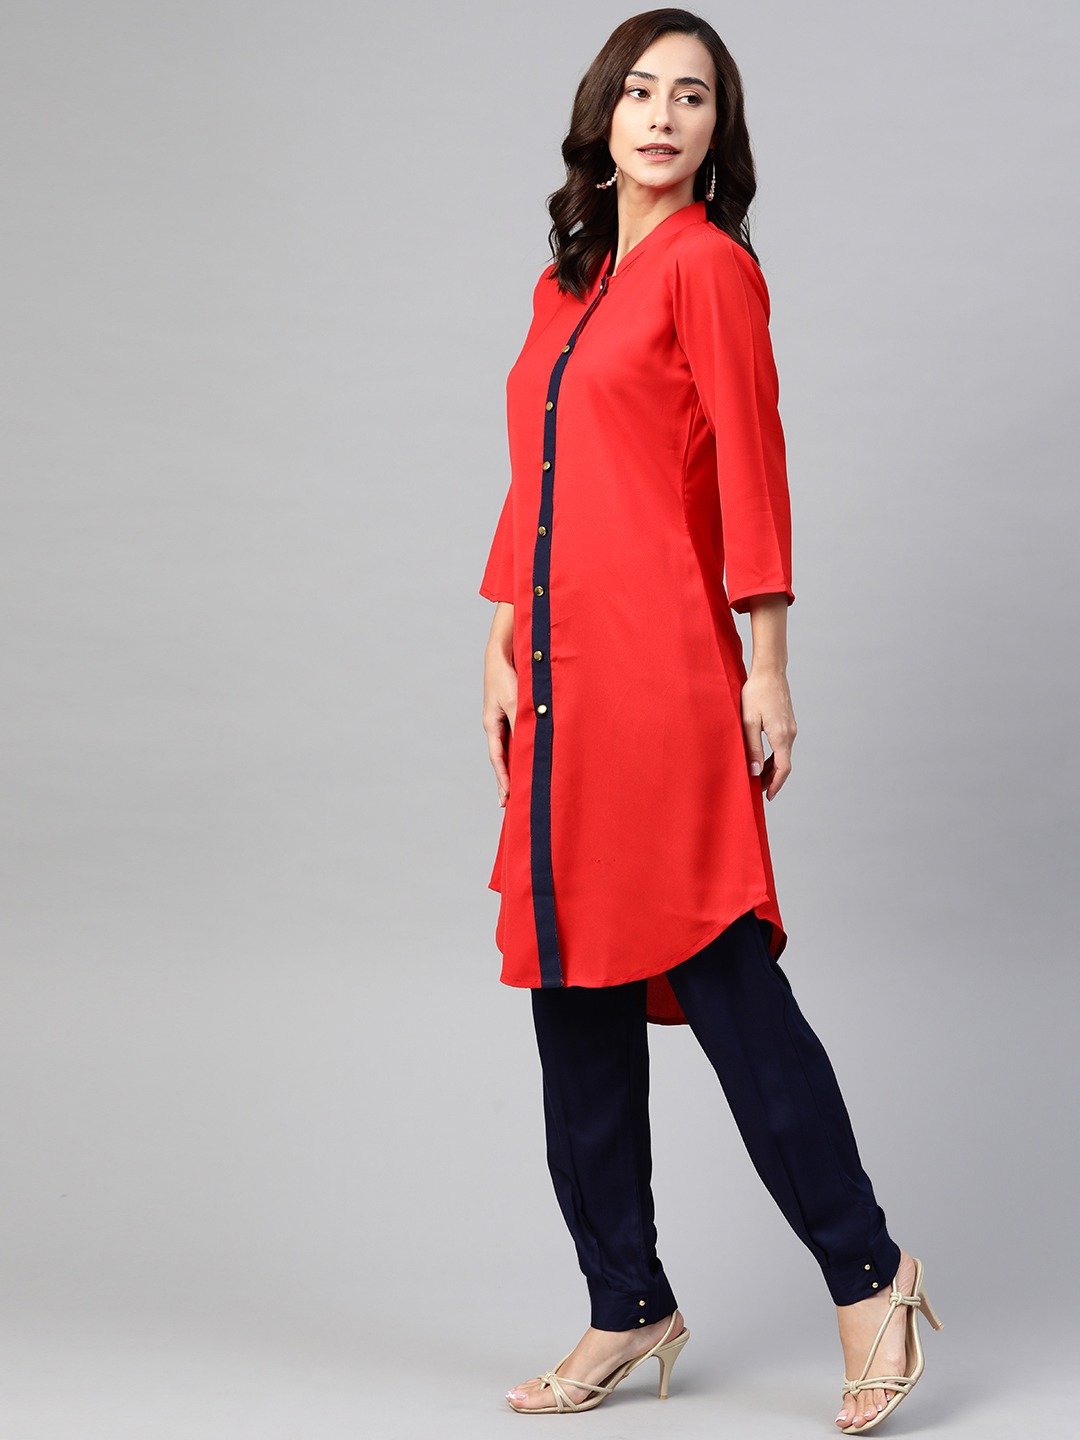 Women's Red & Navy Blue Solid A-line Kurta - Jompers